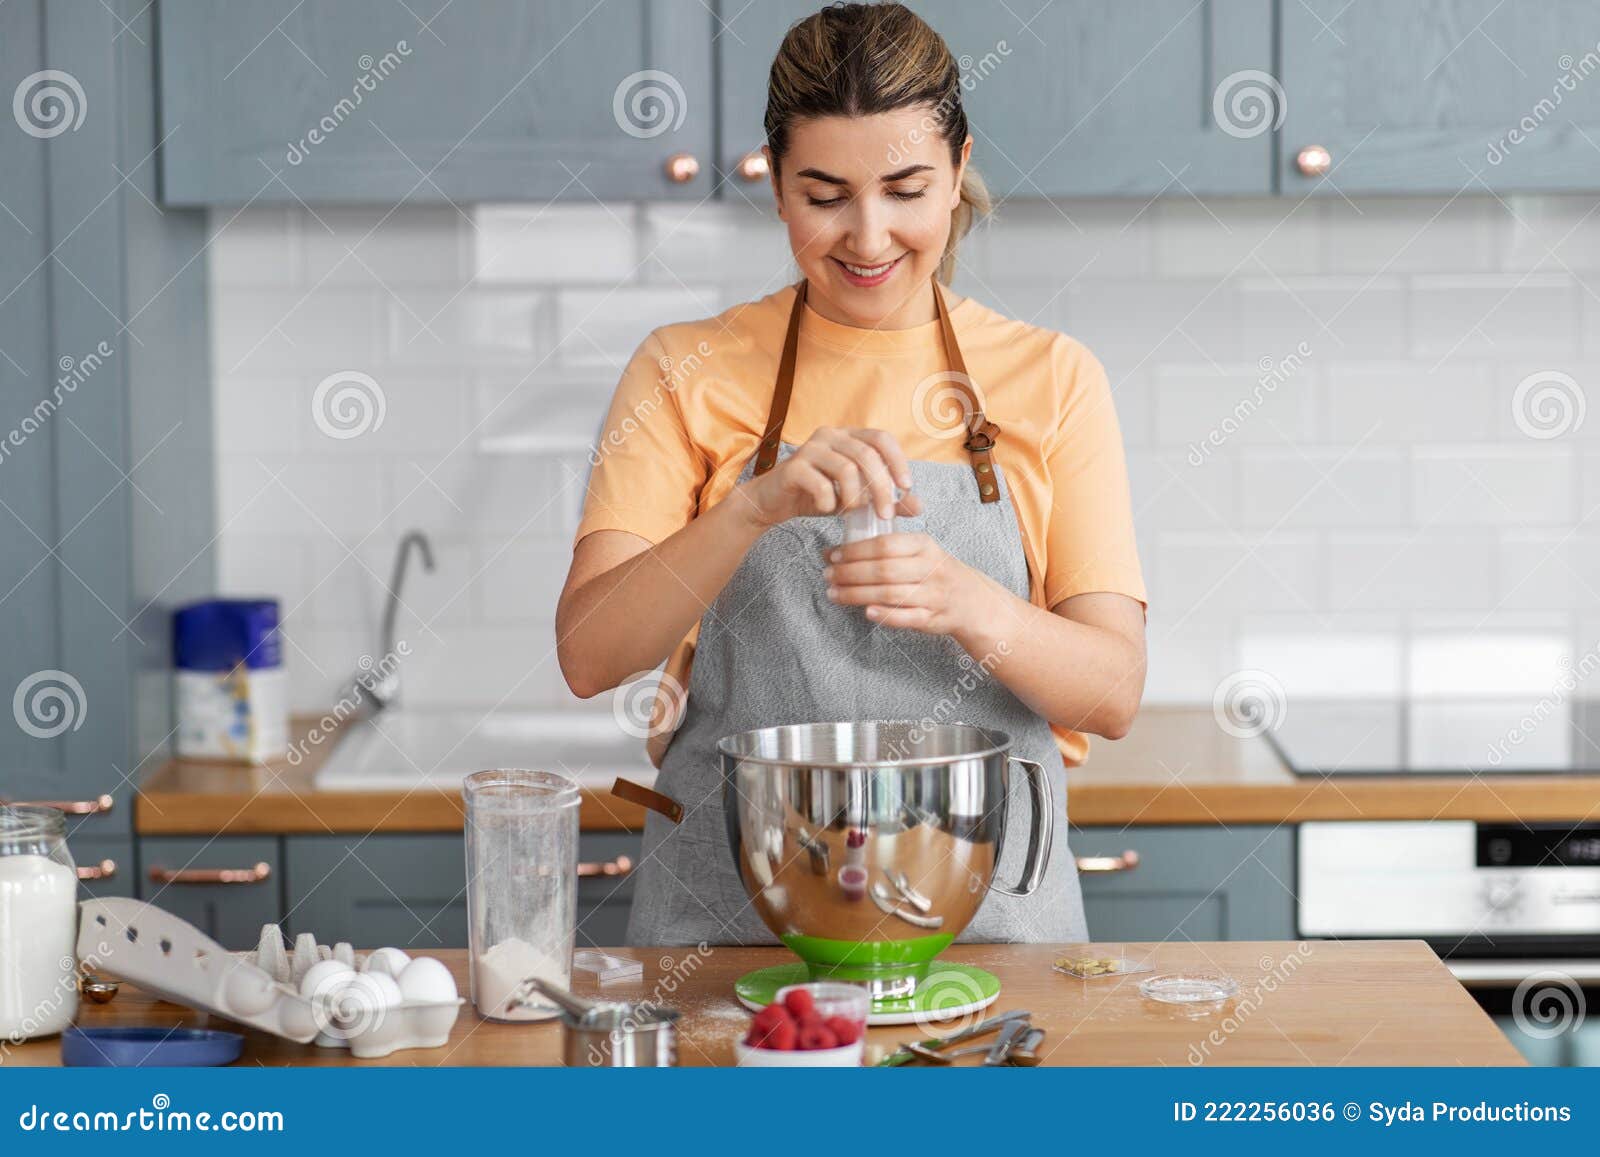 Happy Young Woman Cooking Food on Kitchen at Home Stock Photo - Image ...